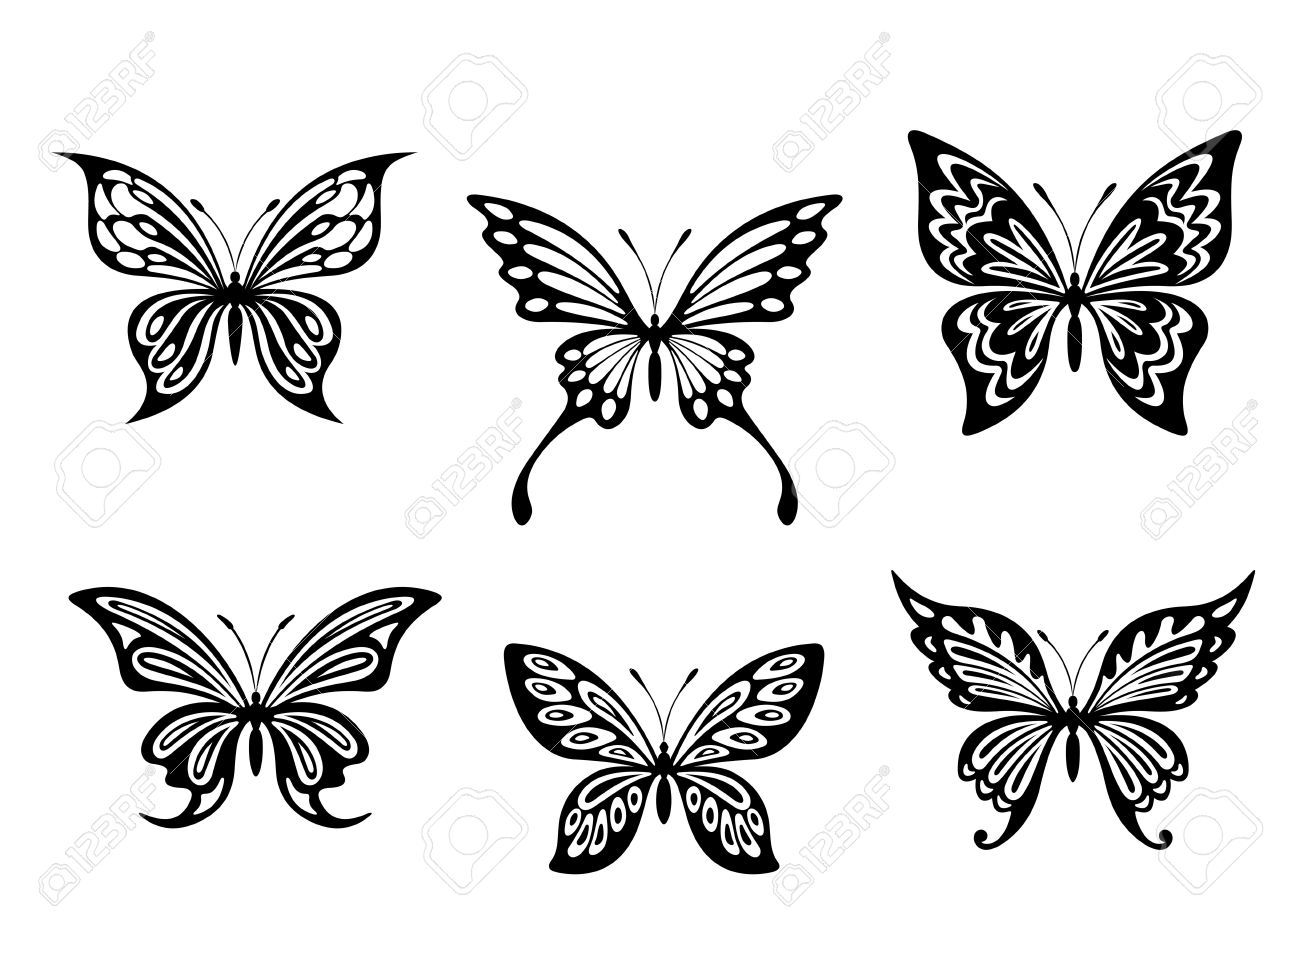 Black Butterfly Tattoos And Silhouettes Isolated On White Background for measurements 1300 X 969